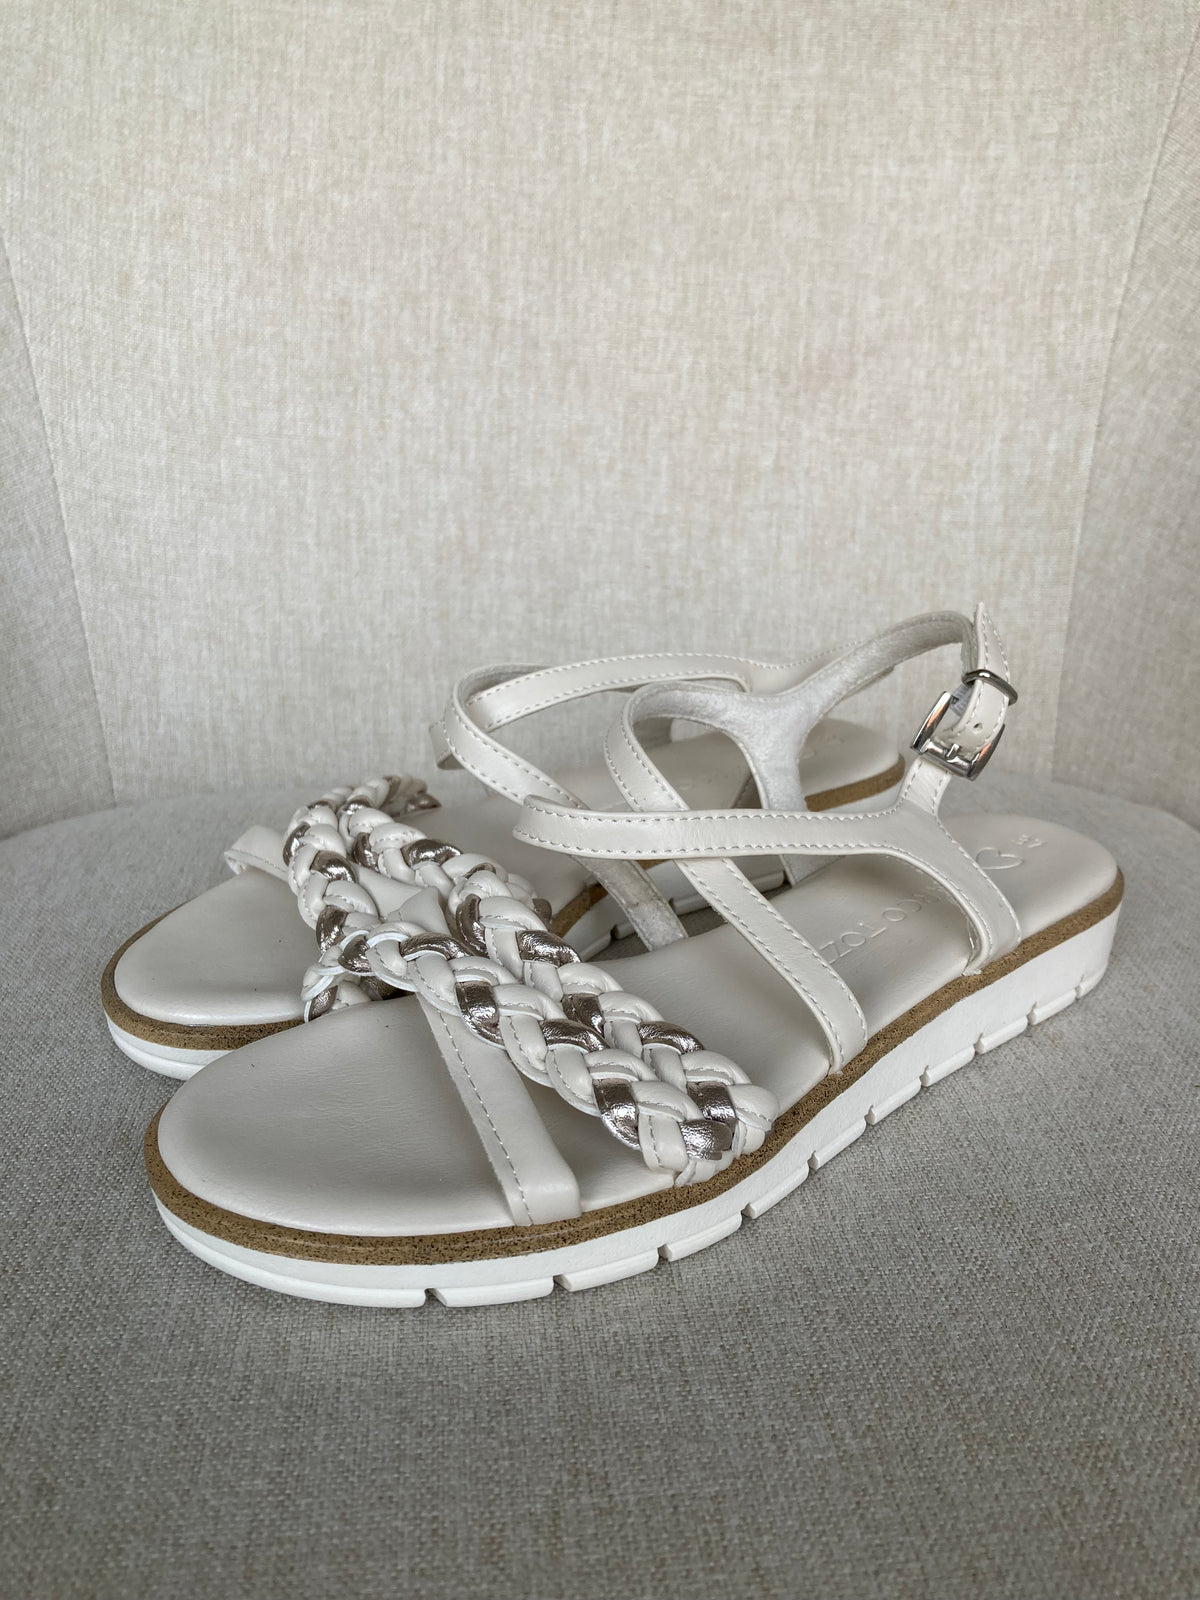 Cream leather sandals by Marco TOZZI - Size 4